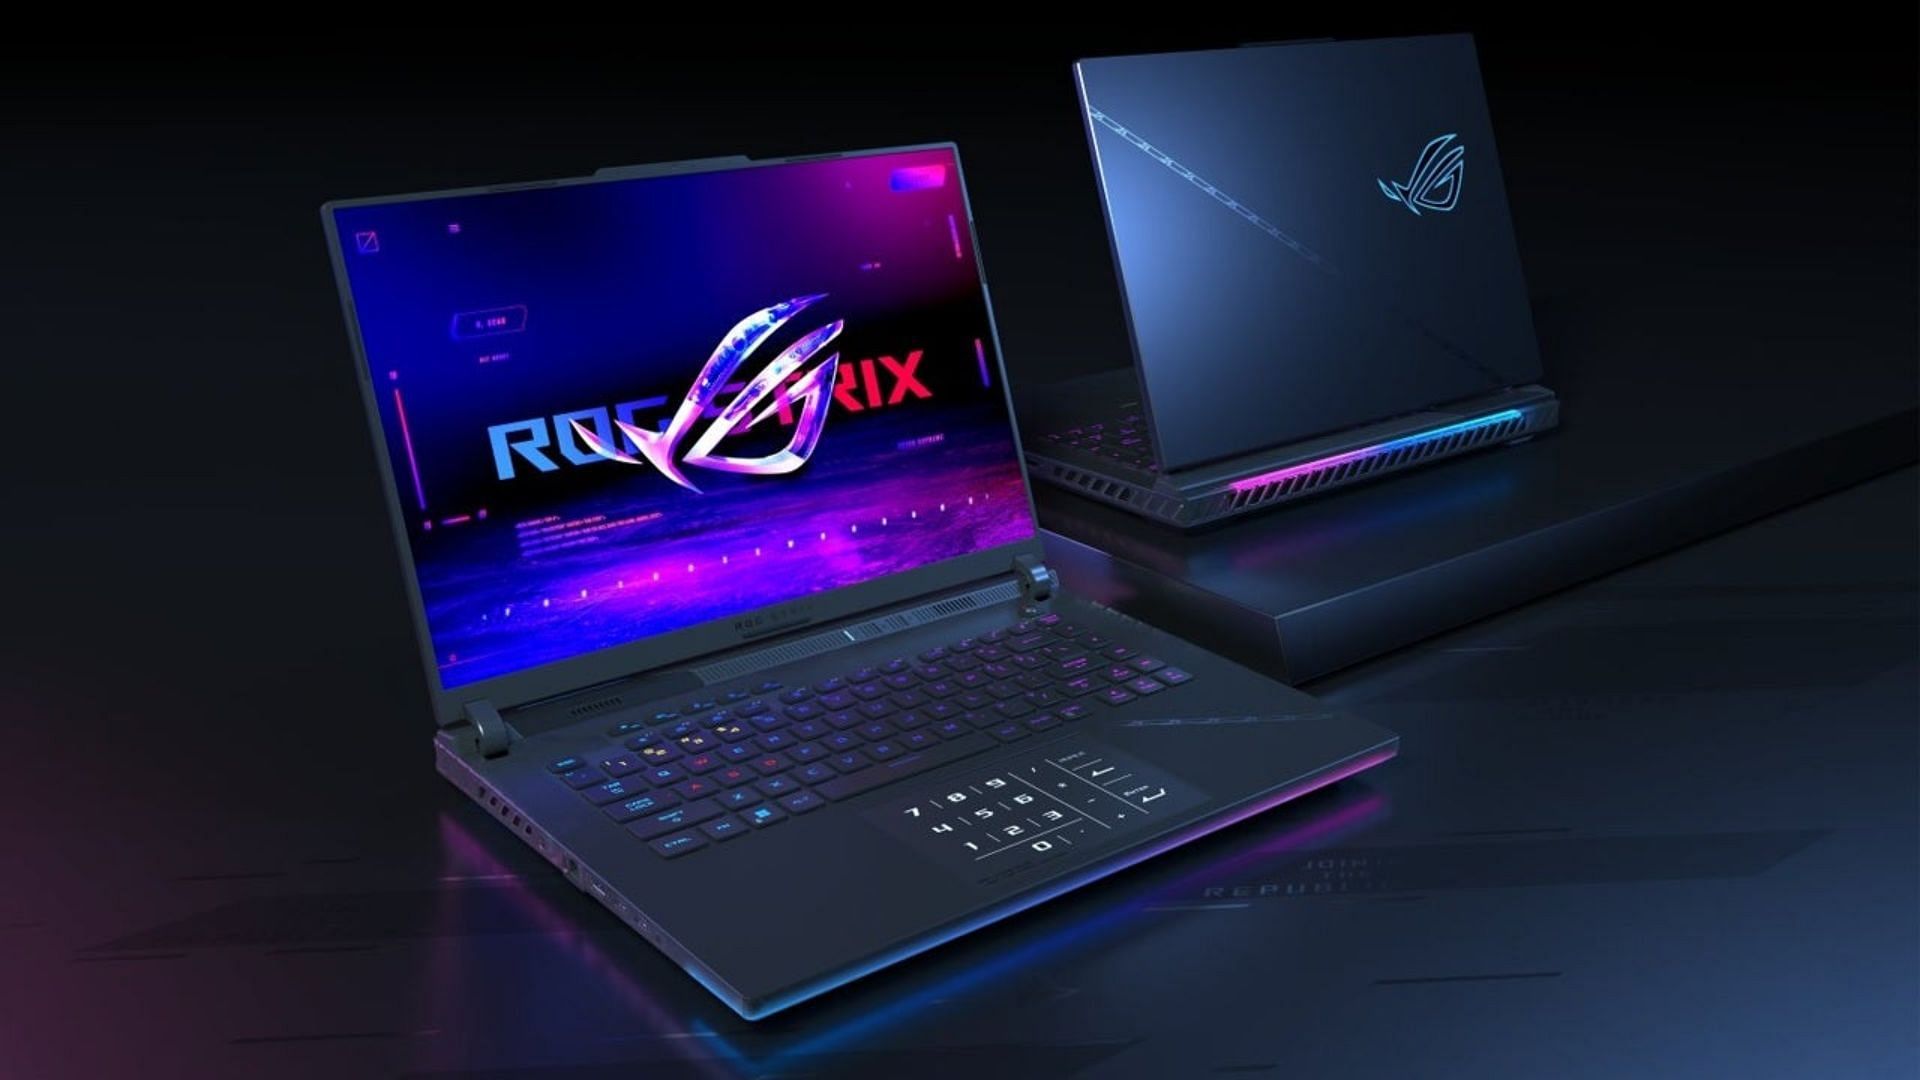 Both RTX 3070 and RTX 4060 laptops deliver good performance, but who